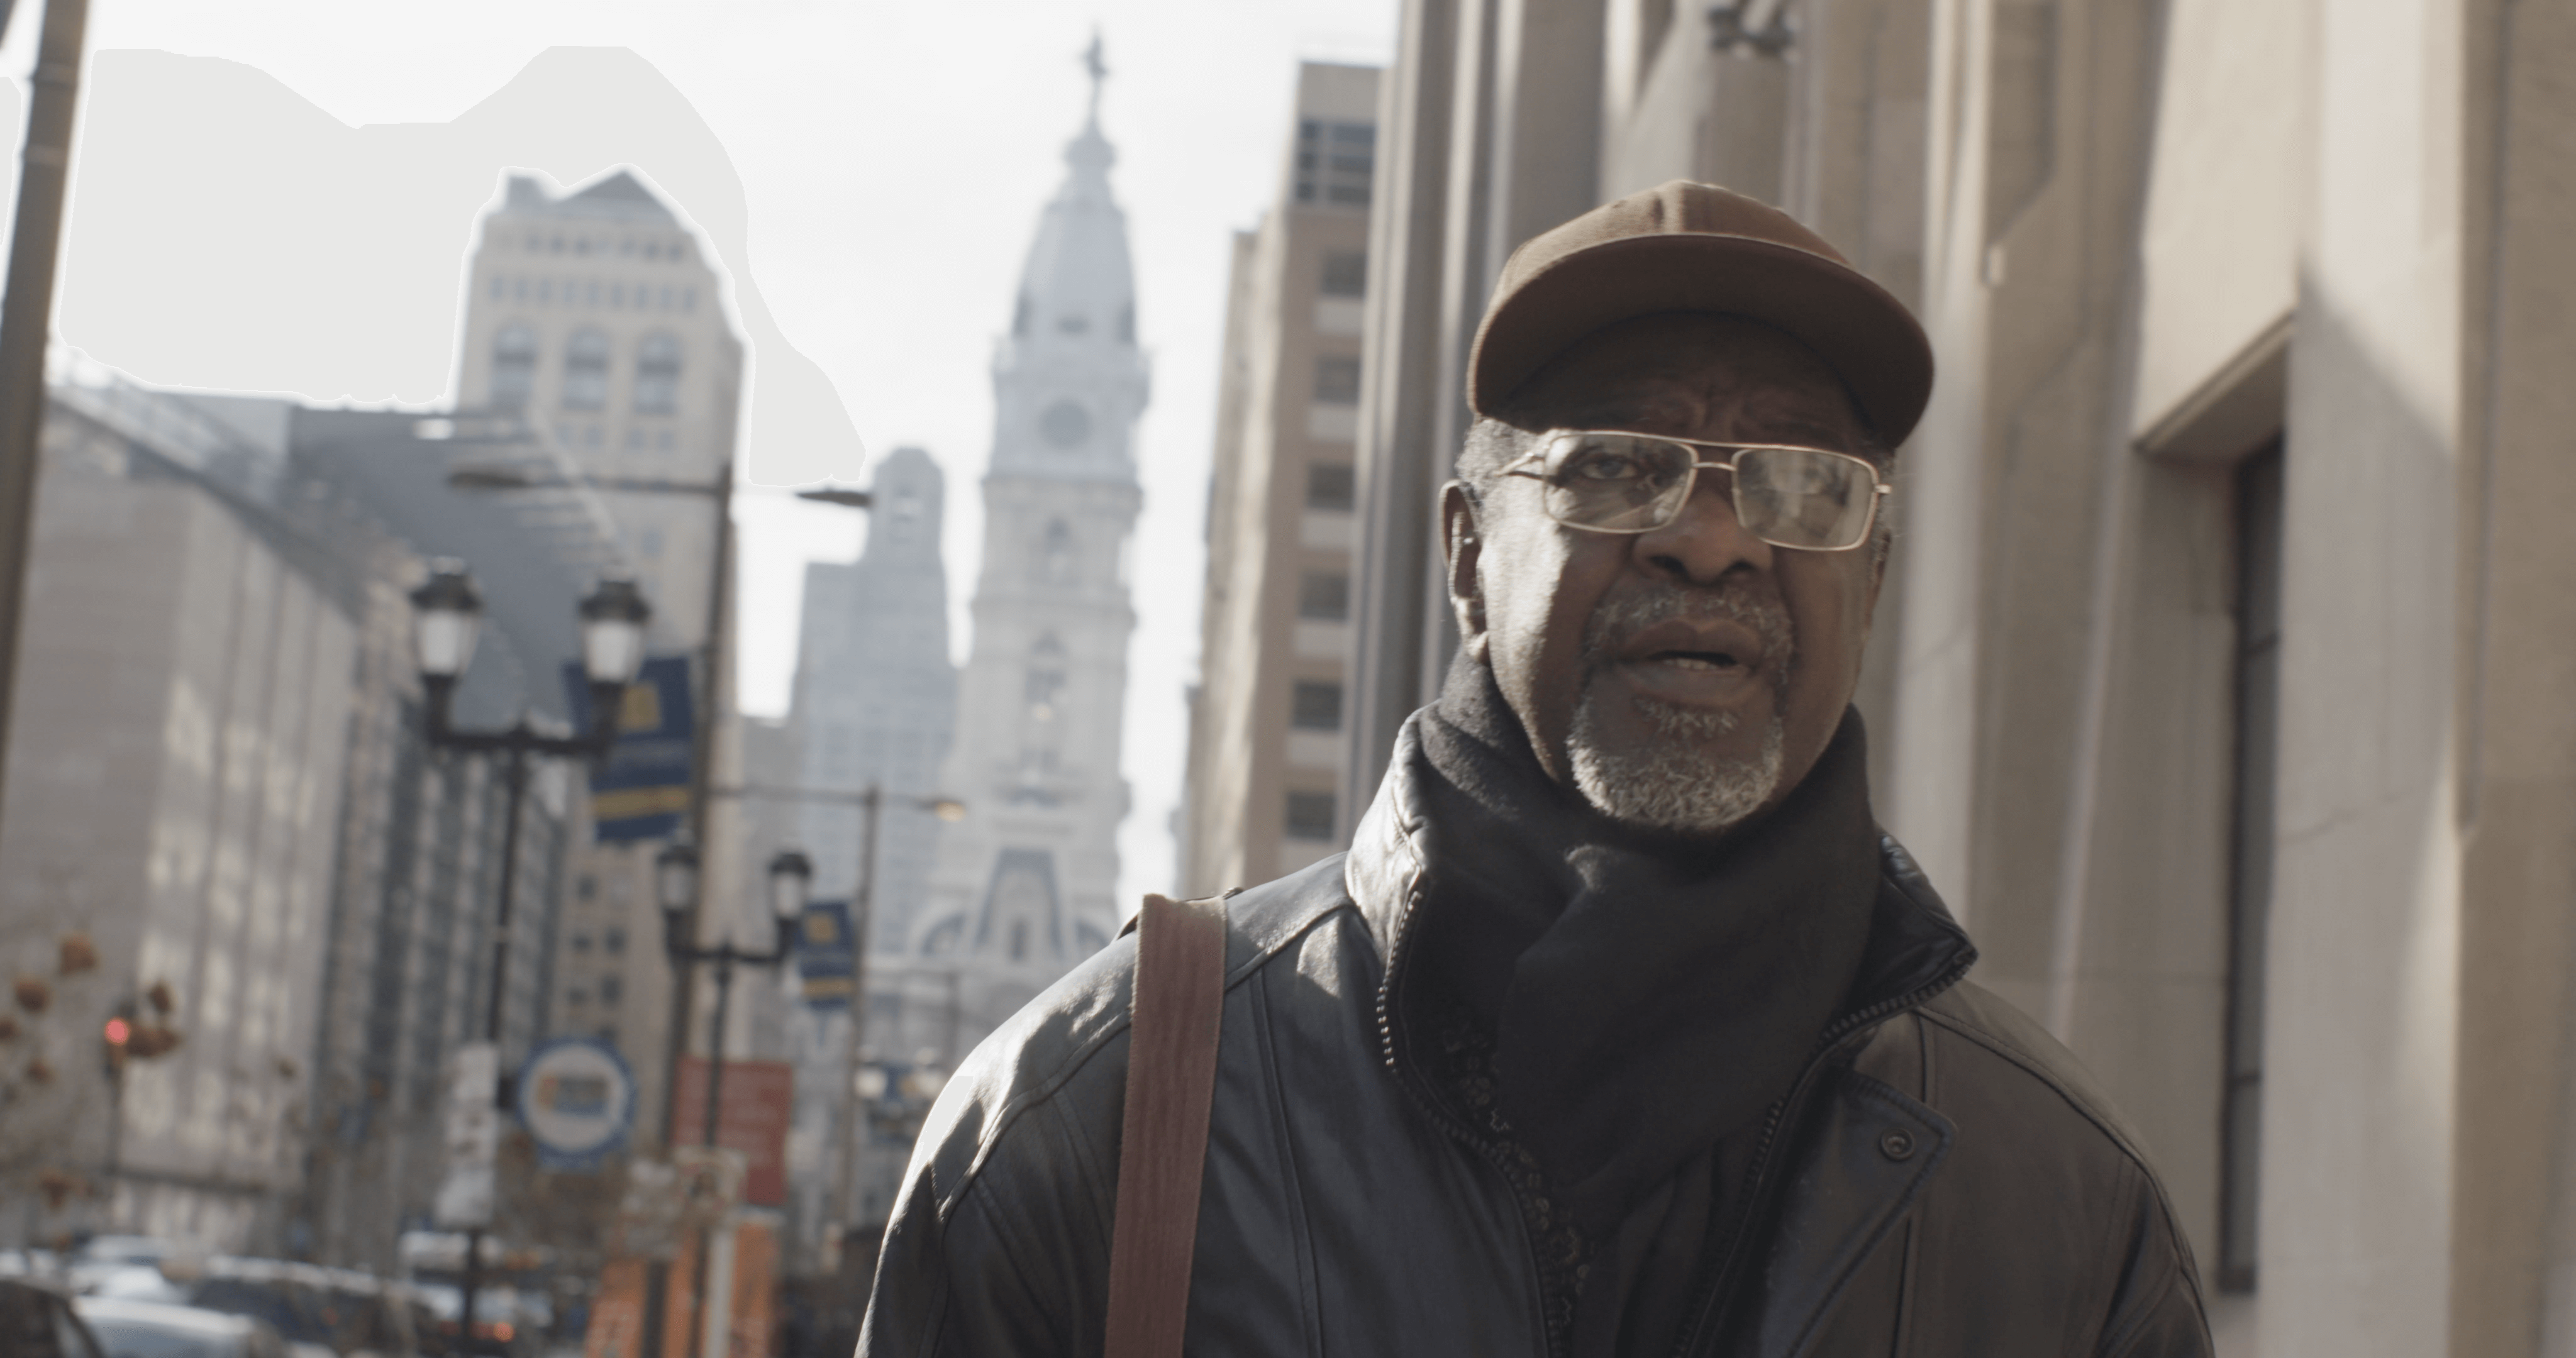 Still from Frank Bey: You're Going to Miss Me. Frank Bey, a man with a salt-and-pepper beard, is wearing gold-frame glasses, brown baseball cap, and black scarf and leather jacket. Behind him tall buildings, street lights, and stoplights are seen slightly out of focus.